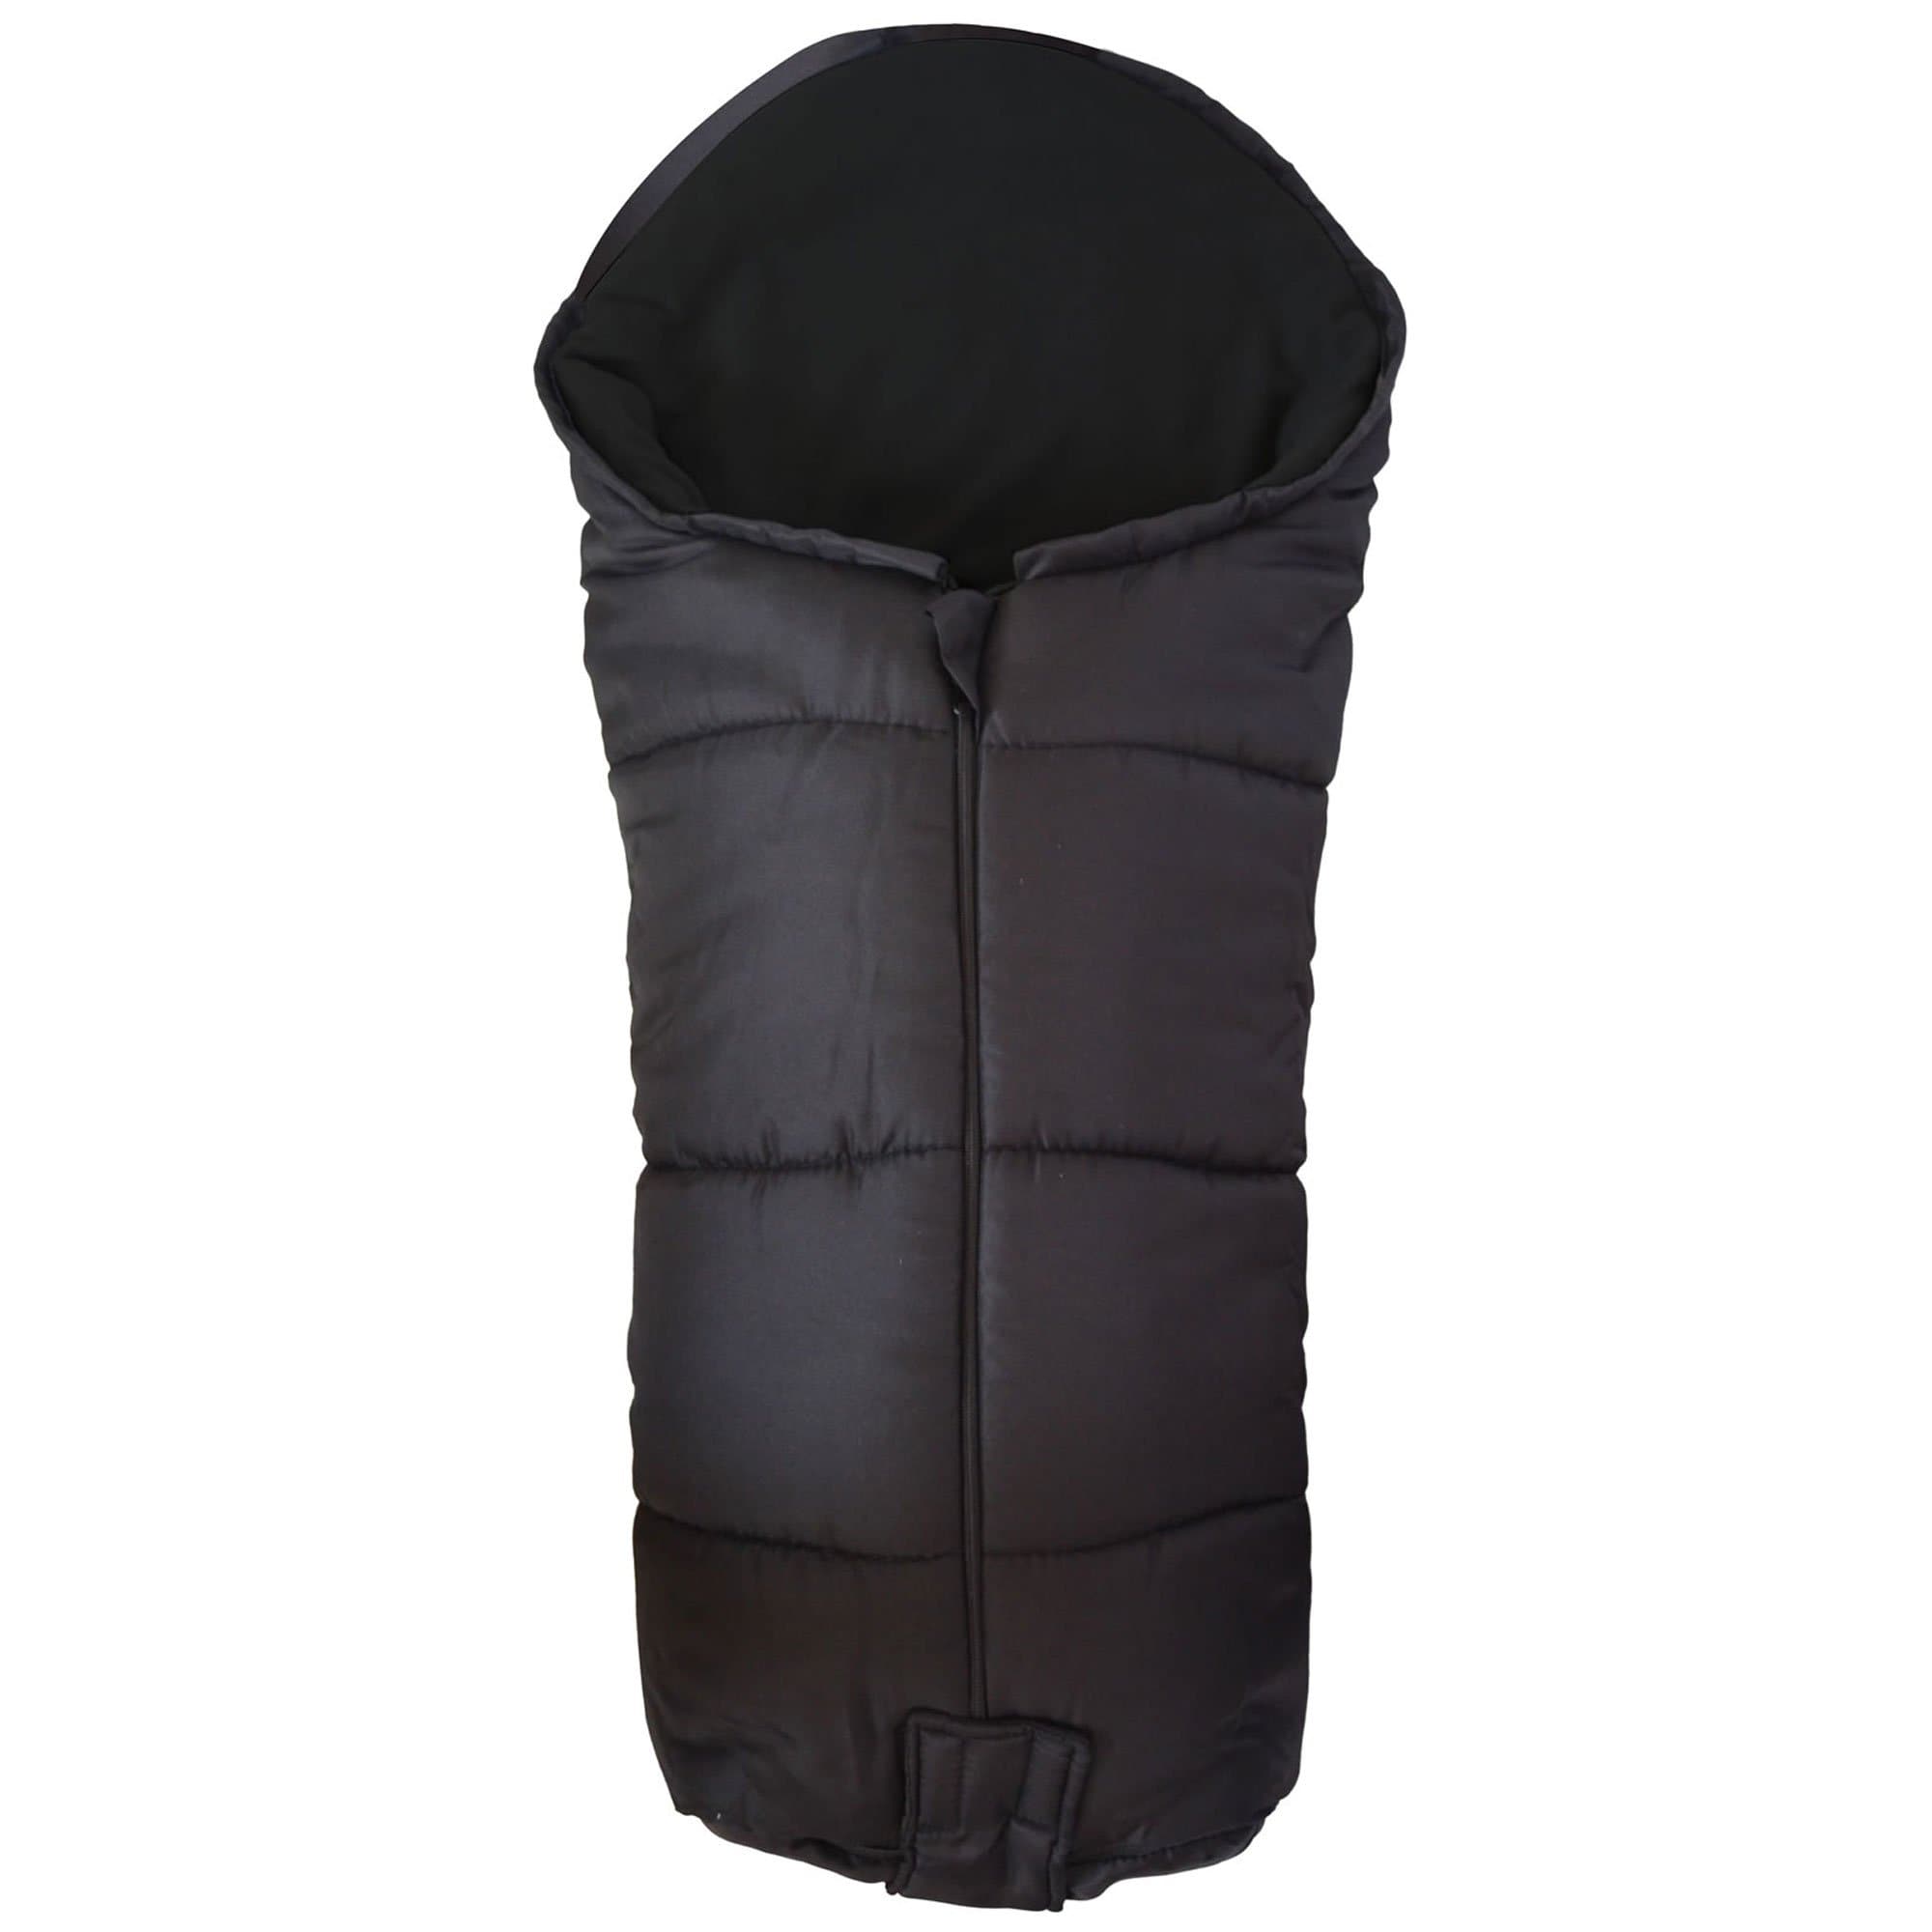 Deluxe Footmuff / Cosy Toes Compatible with Esprit - Black / Fits All Models | For Your Little One